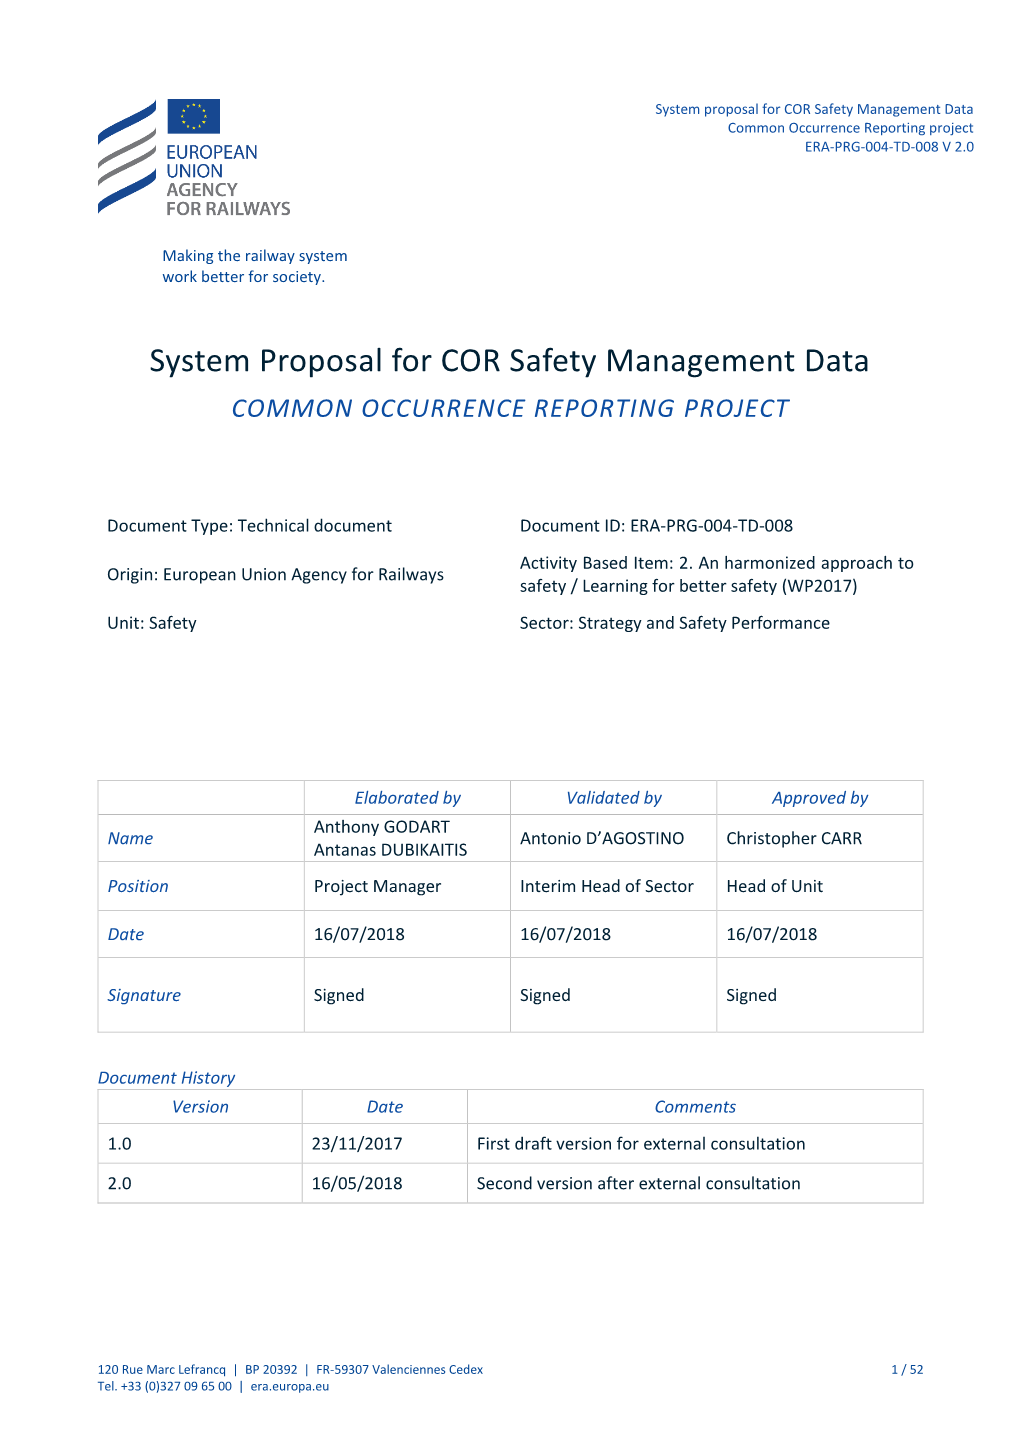 System Proposal for COR Safety Management Data Common Occurrence Reporting Project ERA-PRG-004-TD-008 V 2.0